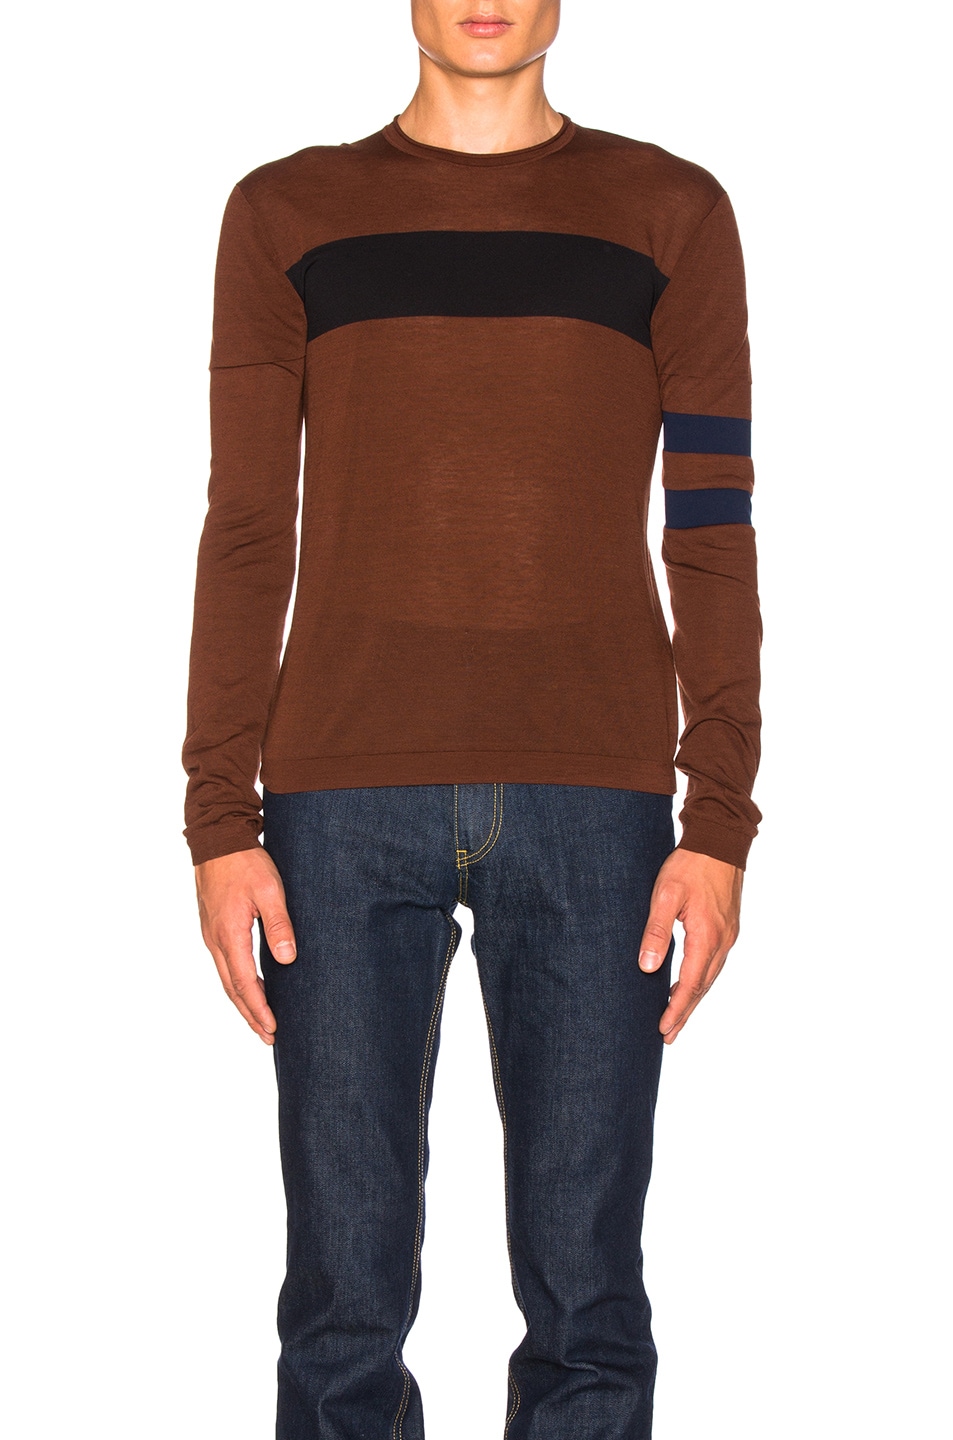 Image 1 of CALVIN KLEIN 205W39NYC Stocking Tee in Tobacco, Black & Navy